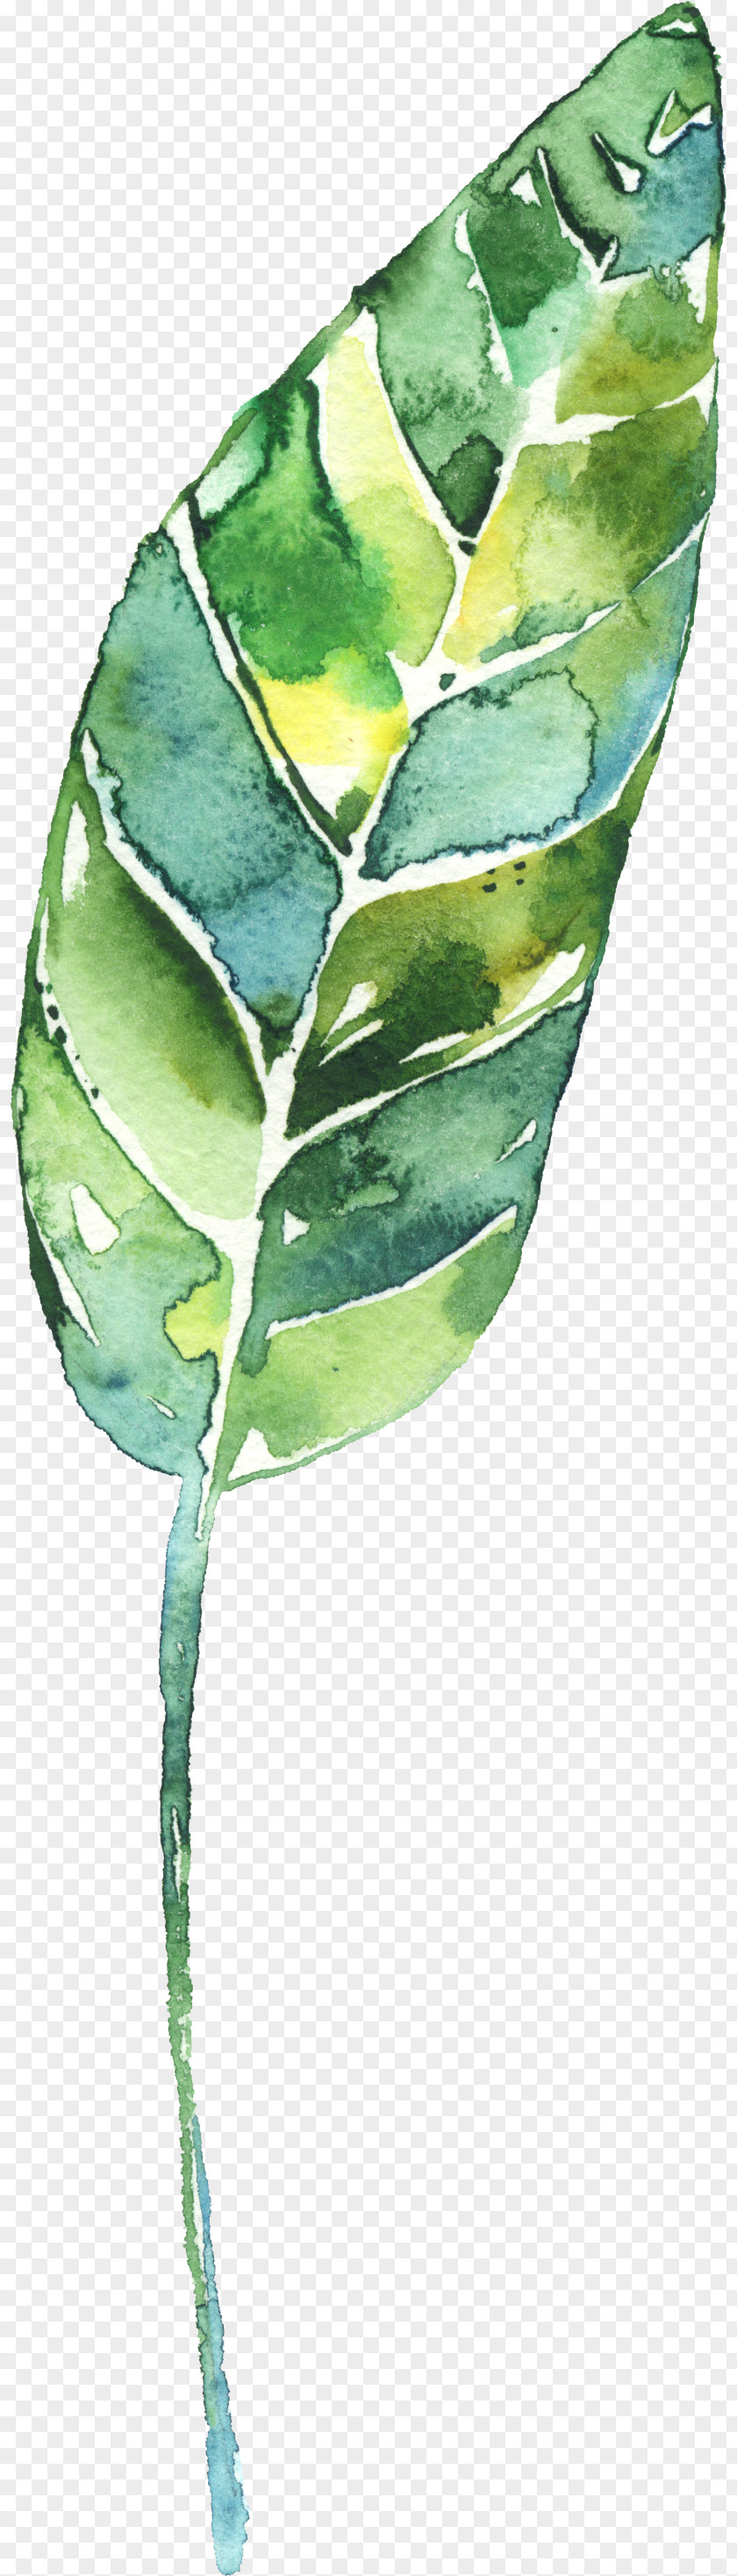 Celebration Flower Line Drawing Creative Watercolor Painting Leaf PNG